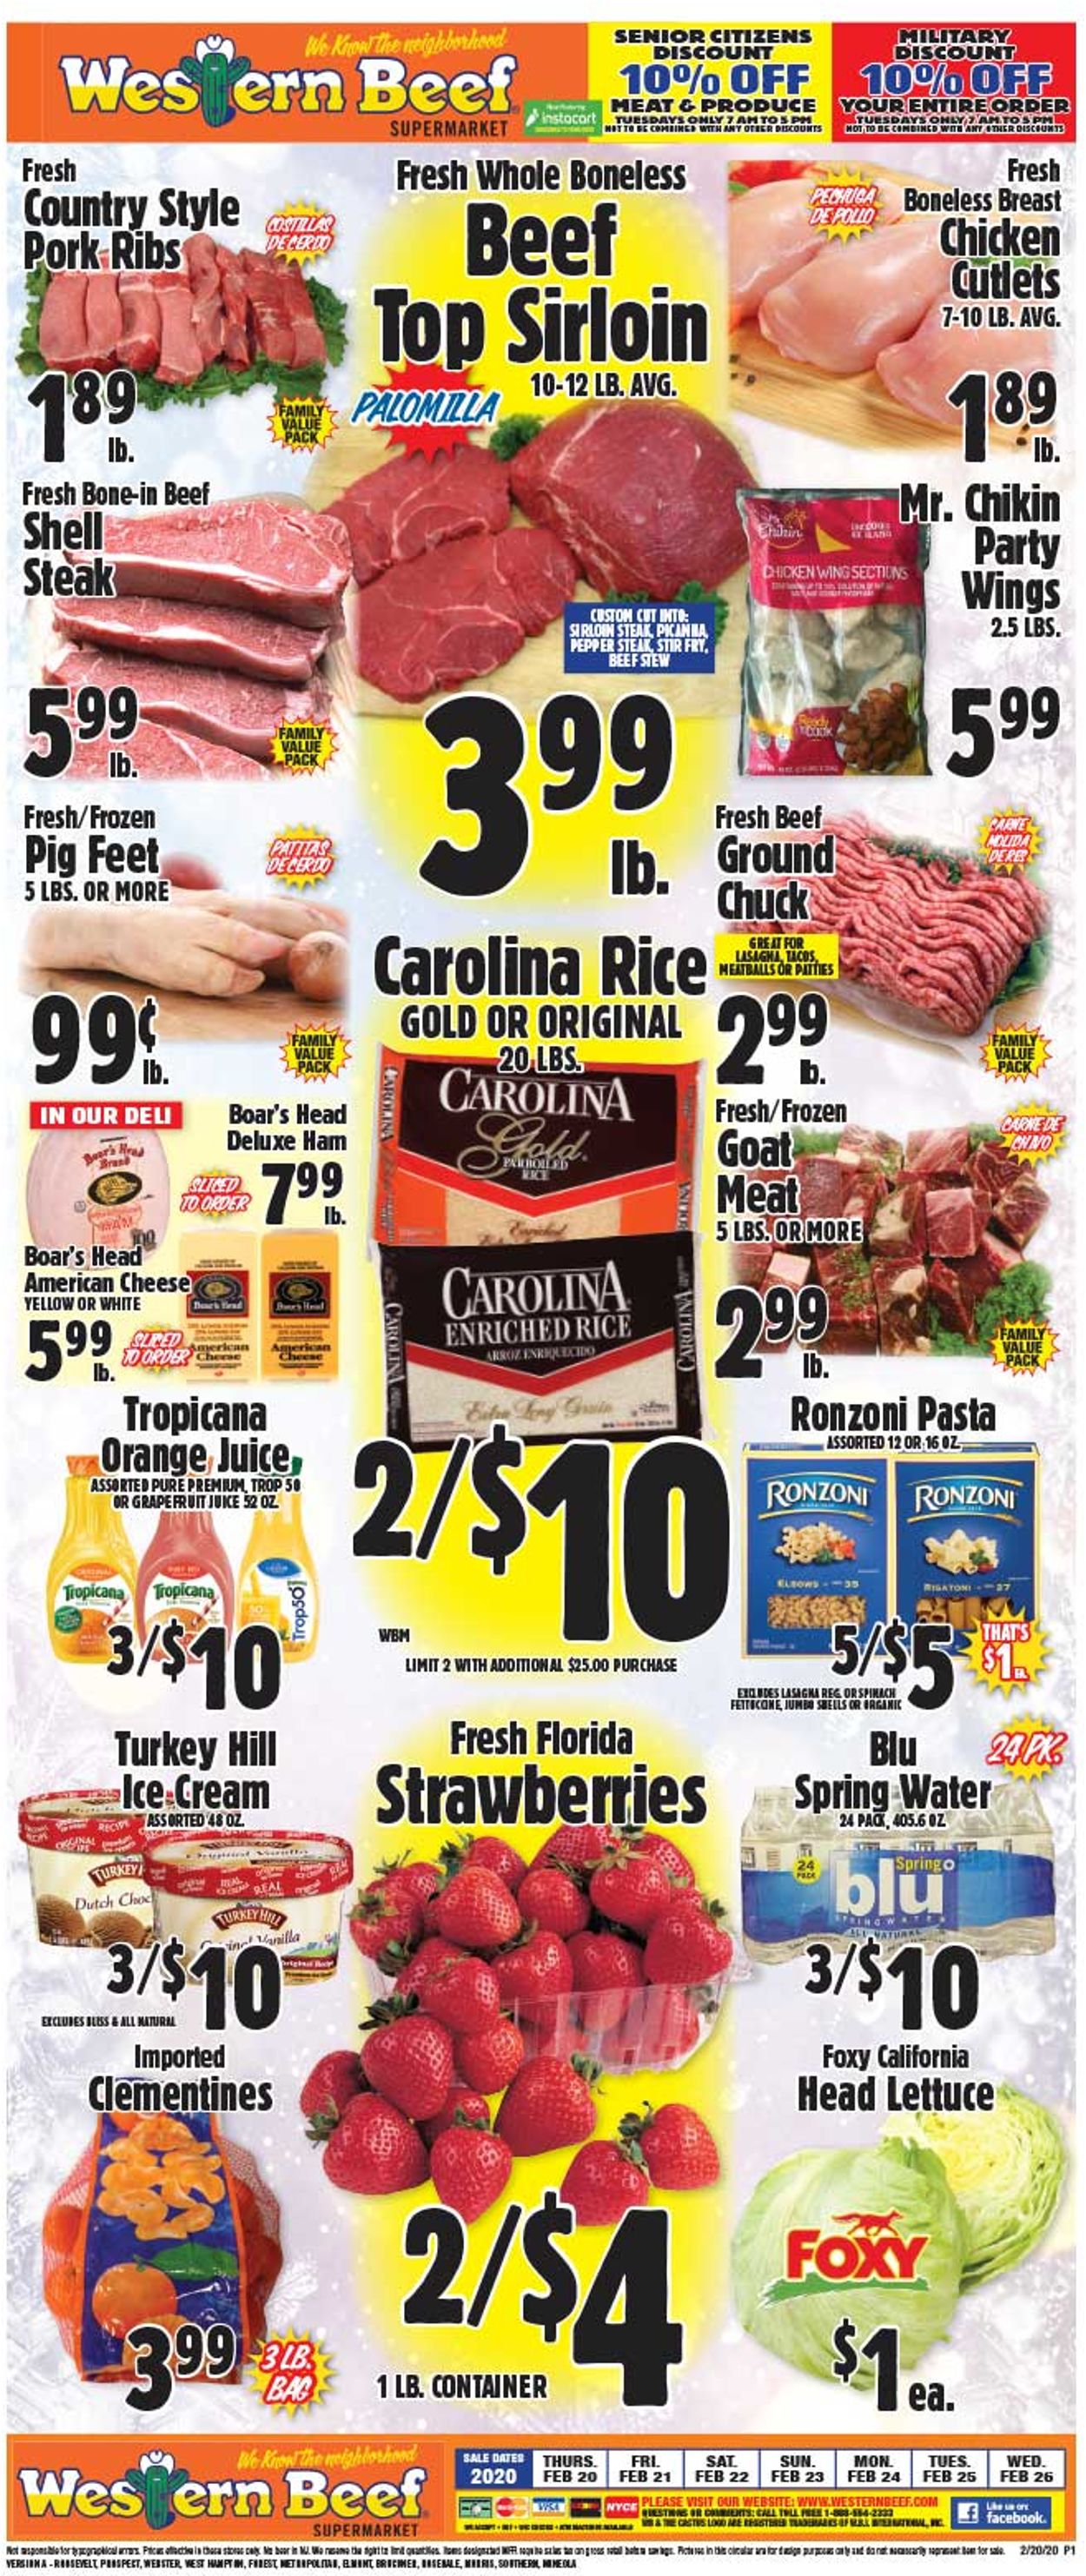 Western Beef Current weekly ad 02/20 - 02/26/2020 - frequent-ads.com